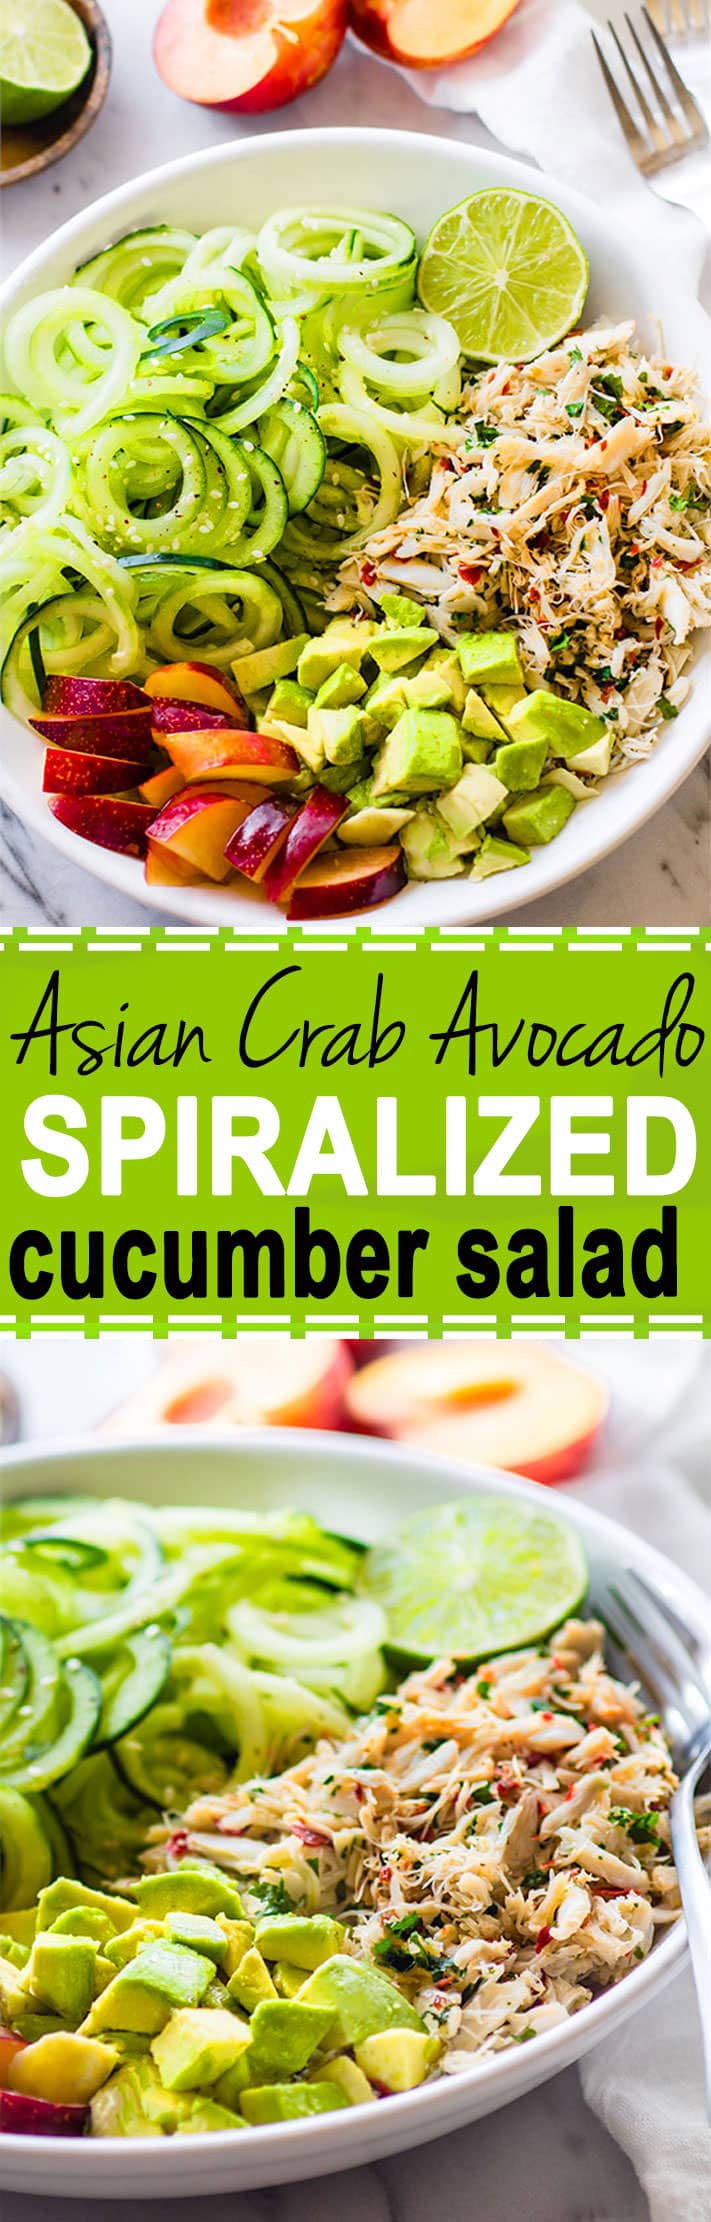 Healthy Asian Crab and Avocado Spiralized Cucumber Salad. Seafood lovers rejoice! You'll love this Power Lunch Paleo Asian Crab and Avocado Cucumber Salad! Light, Gluten Free, protein packed, and nutrient dense!! @cottercrunch